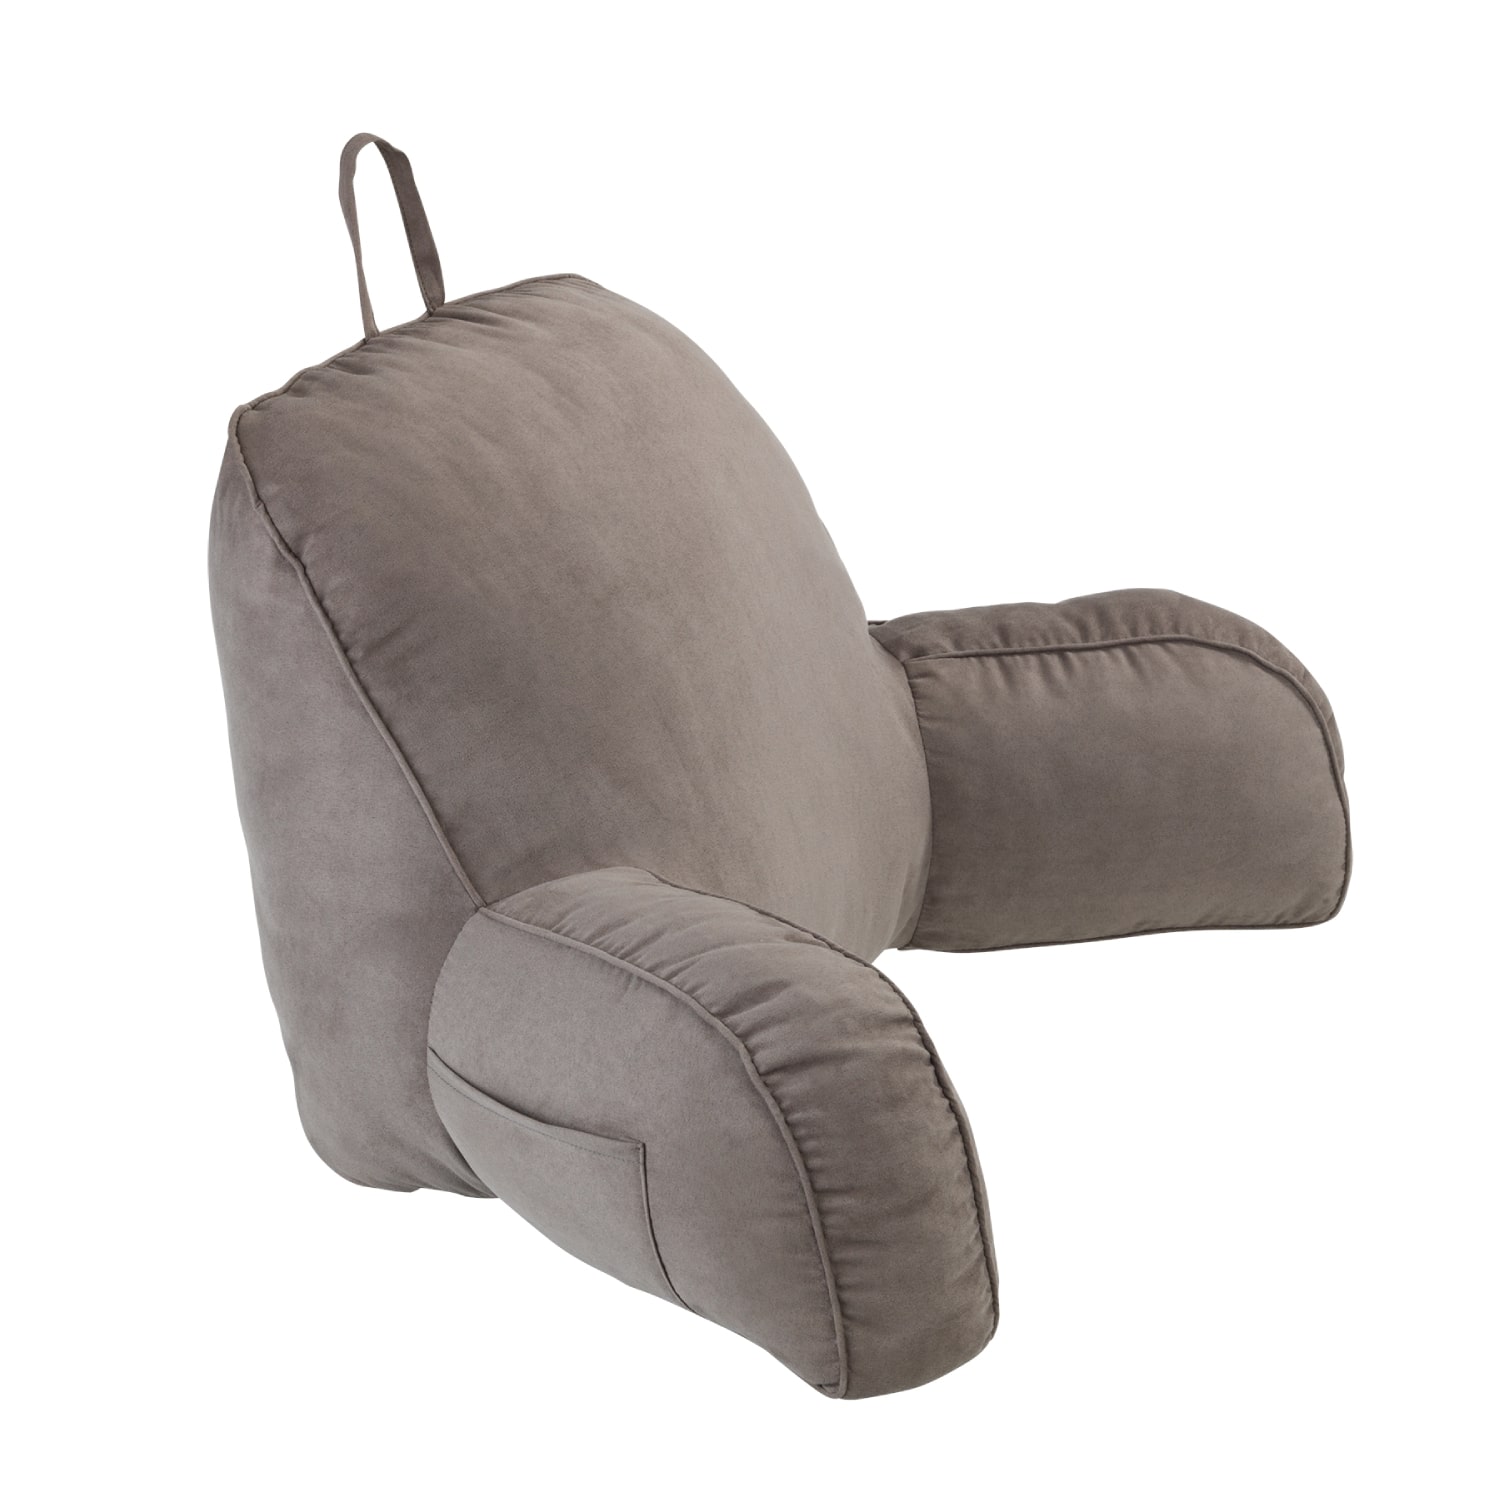 Back cushions with armrests - with a high backrest for optimum support